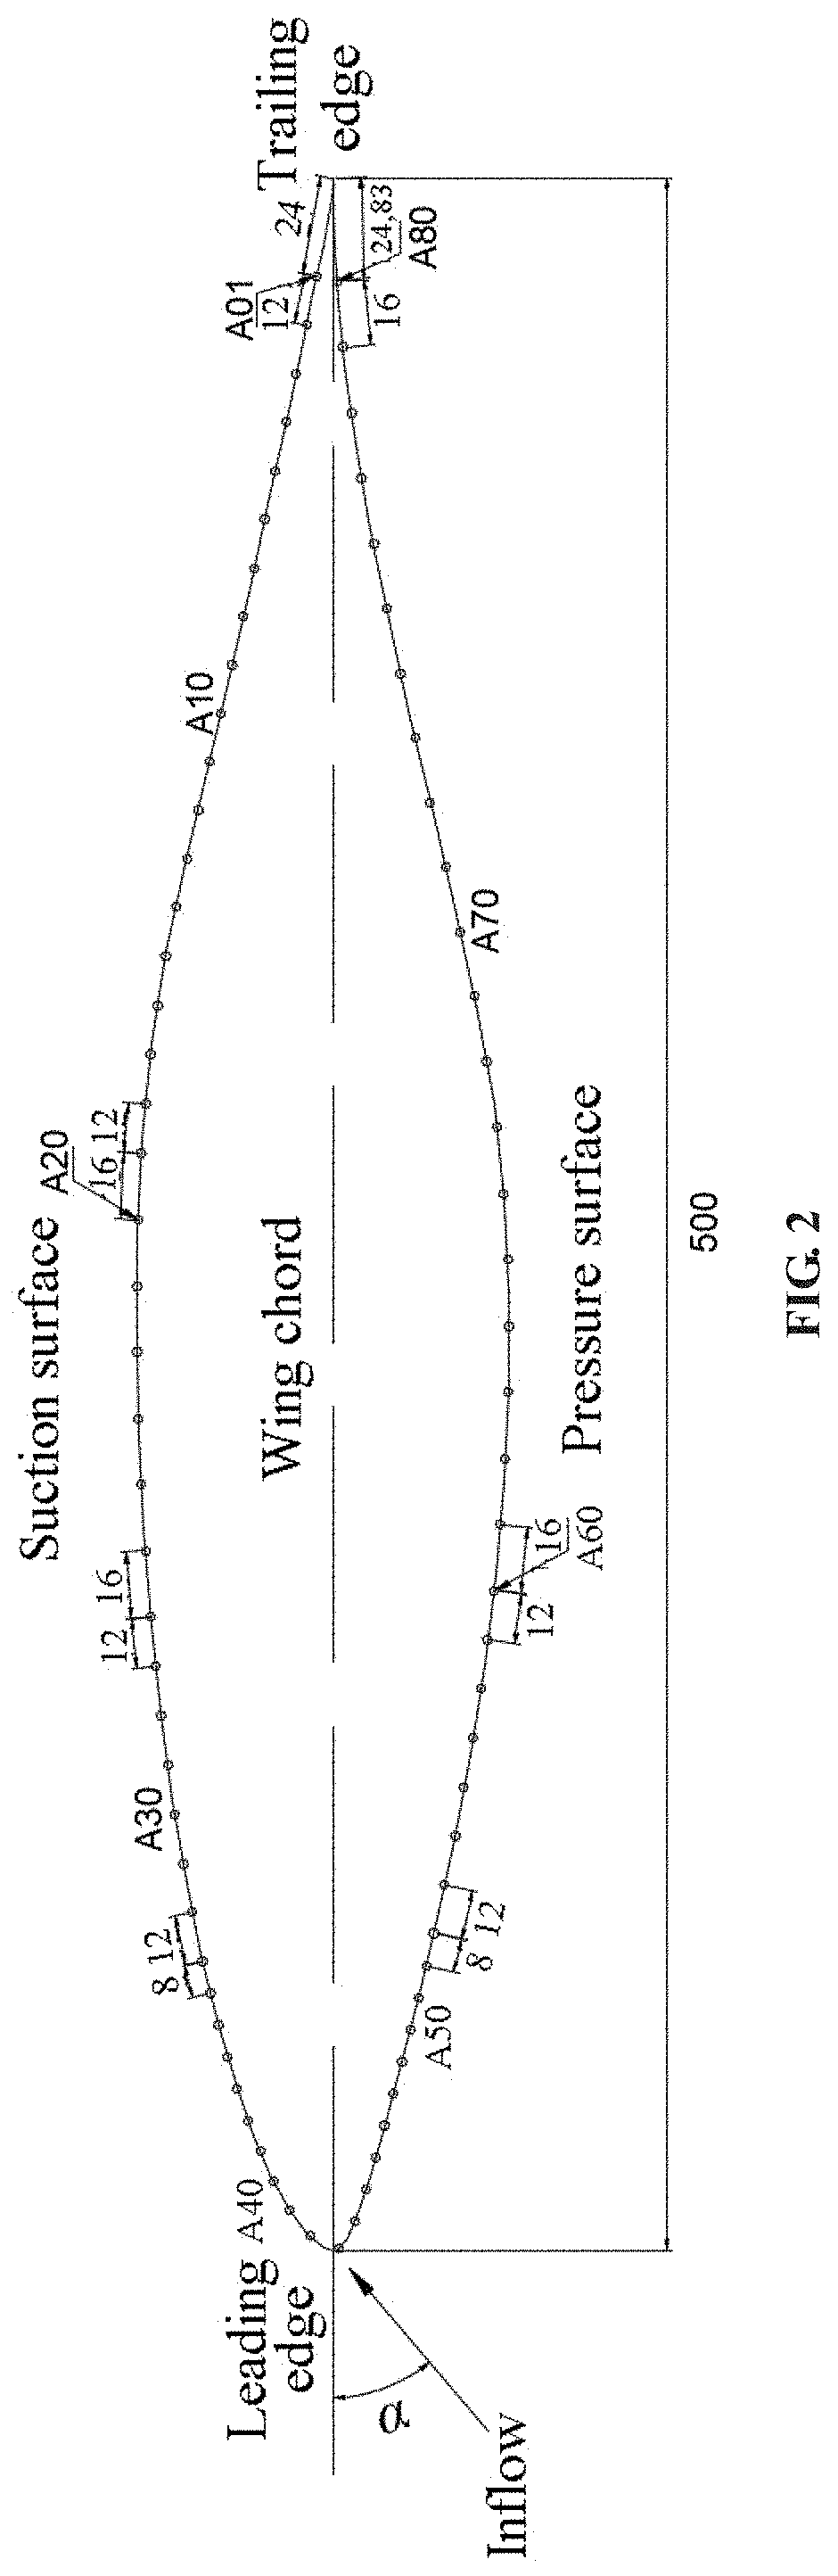 Method and system for calculating aerodynamic force of wind turbine airfoil under different turbulence intensities